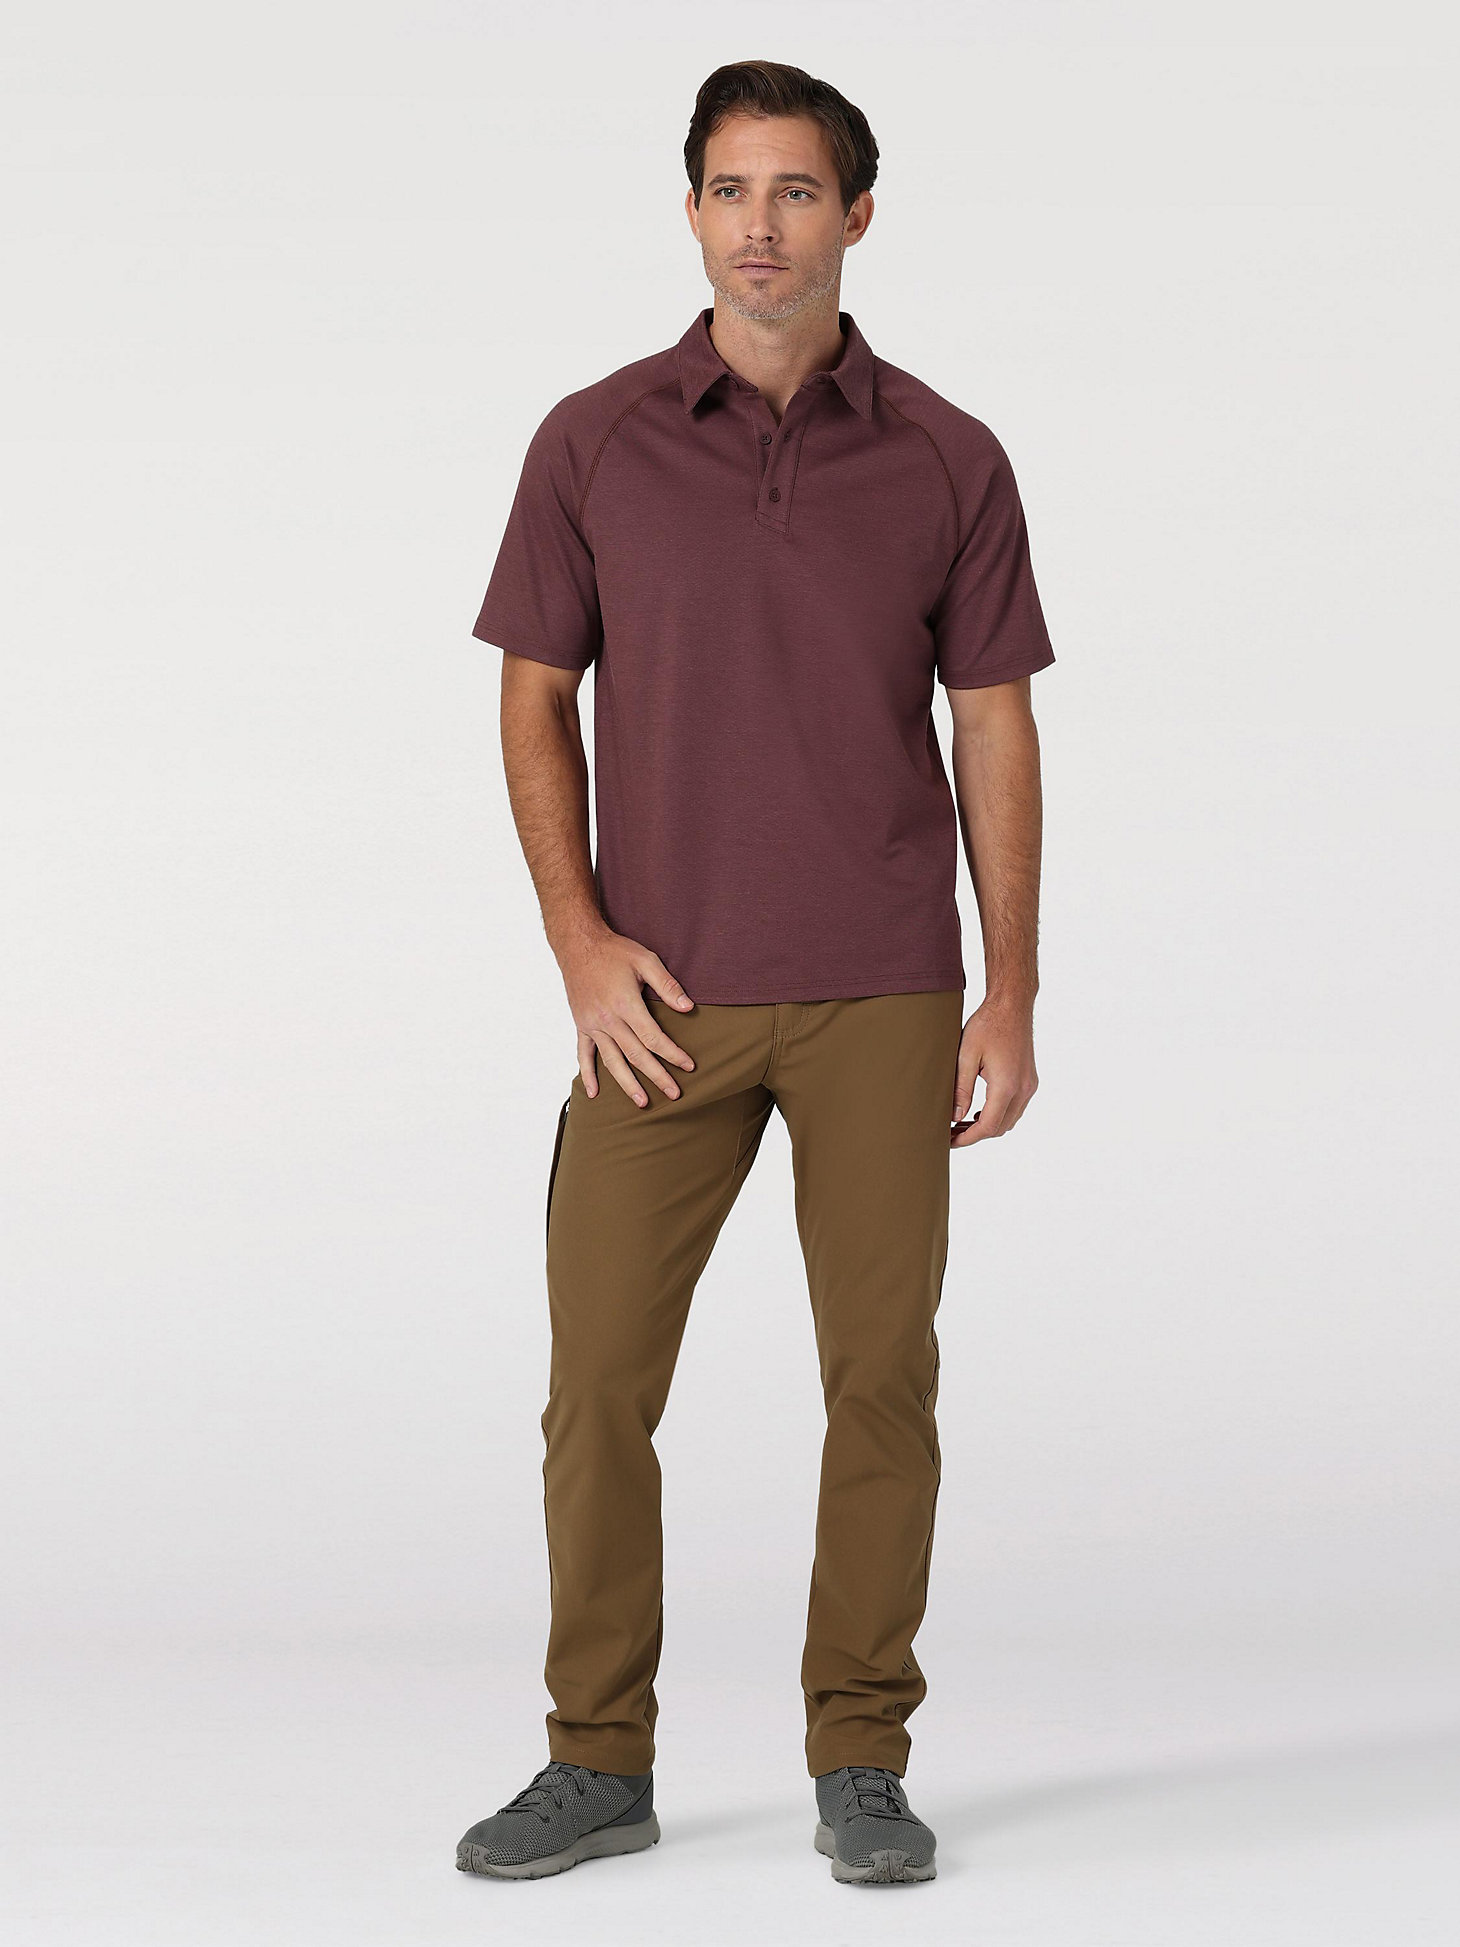 Short Sleeve Performance Polo in Decadent Chocolate alternative view 1